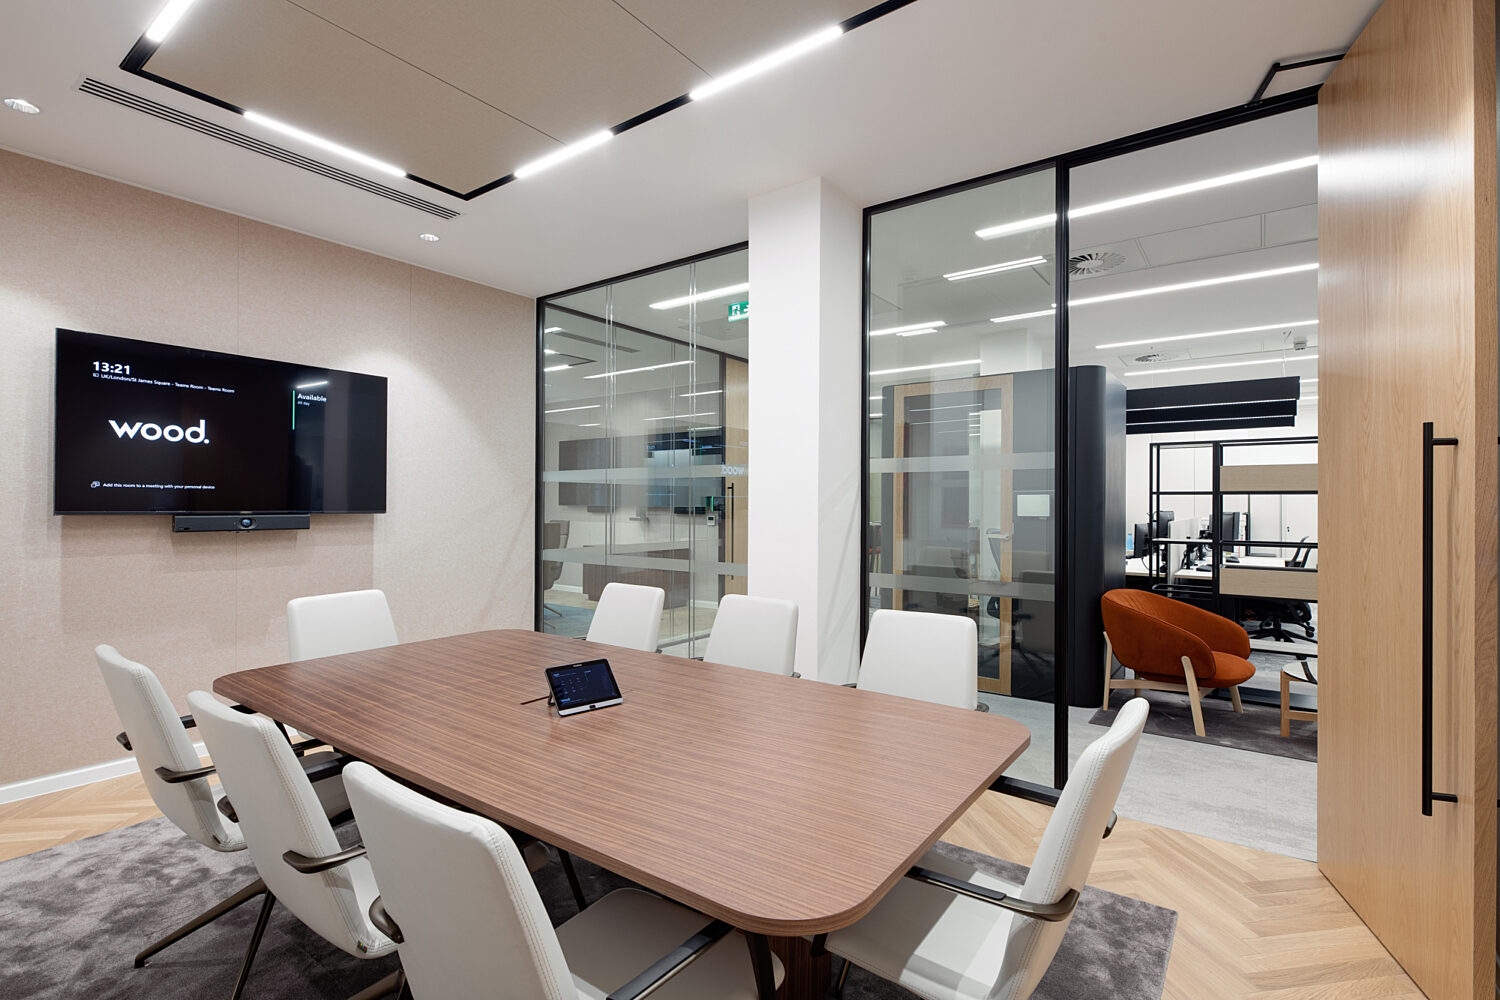 Wood group meeting rooms with private phone booths and office space in the background